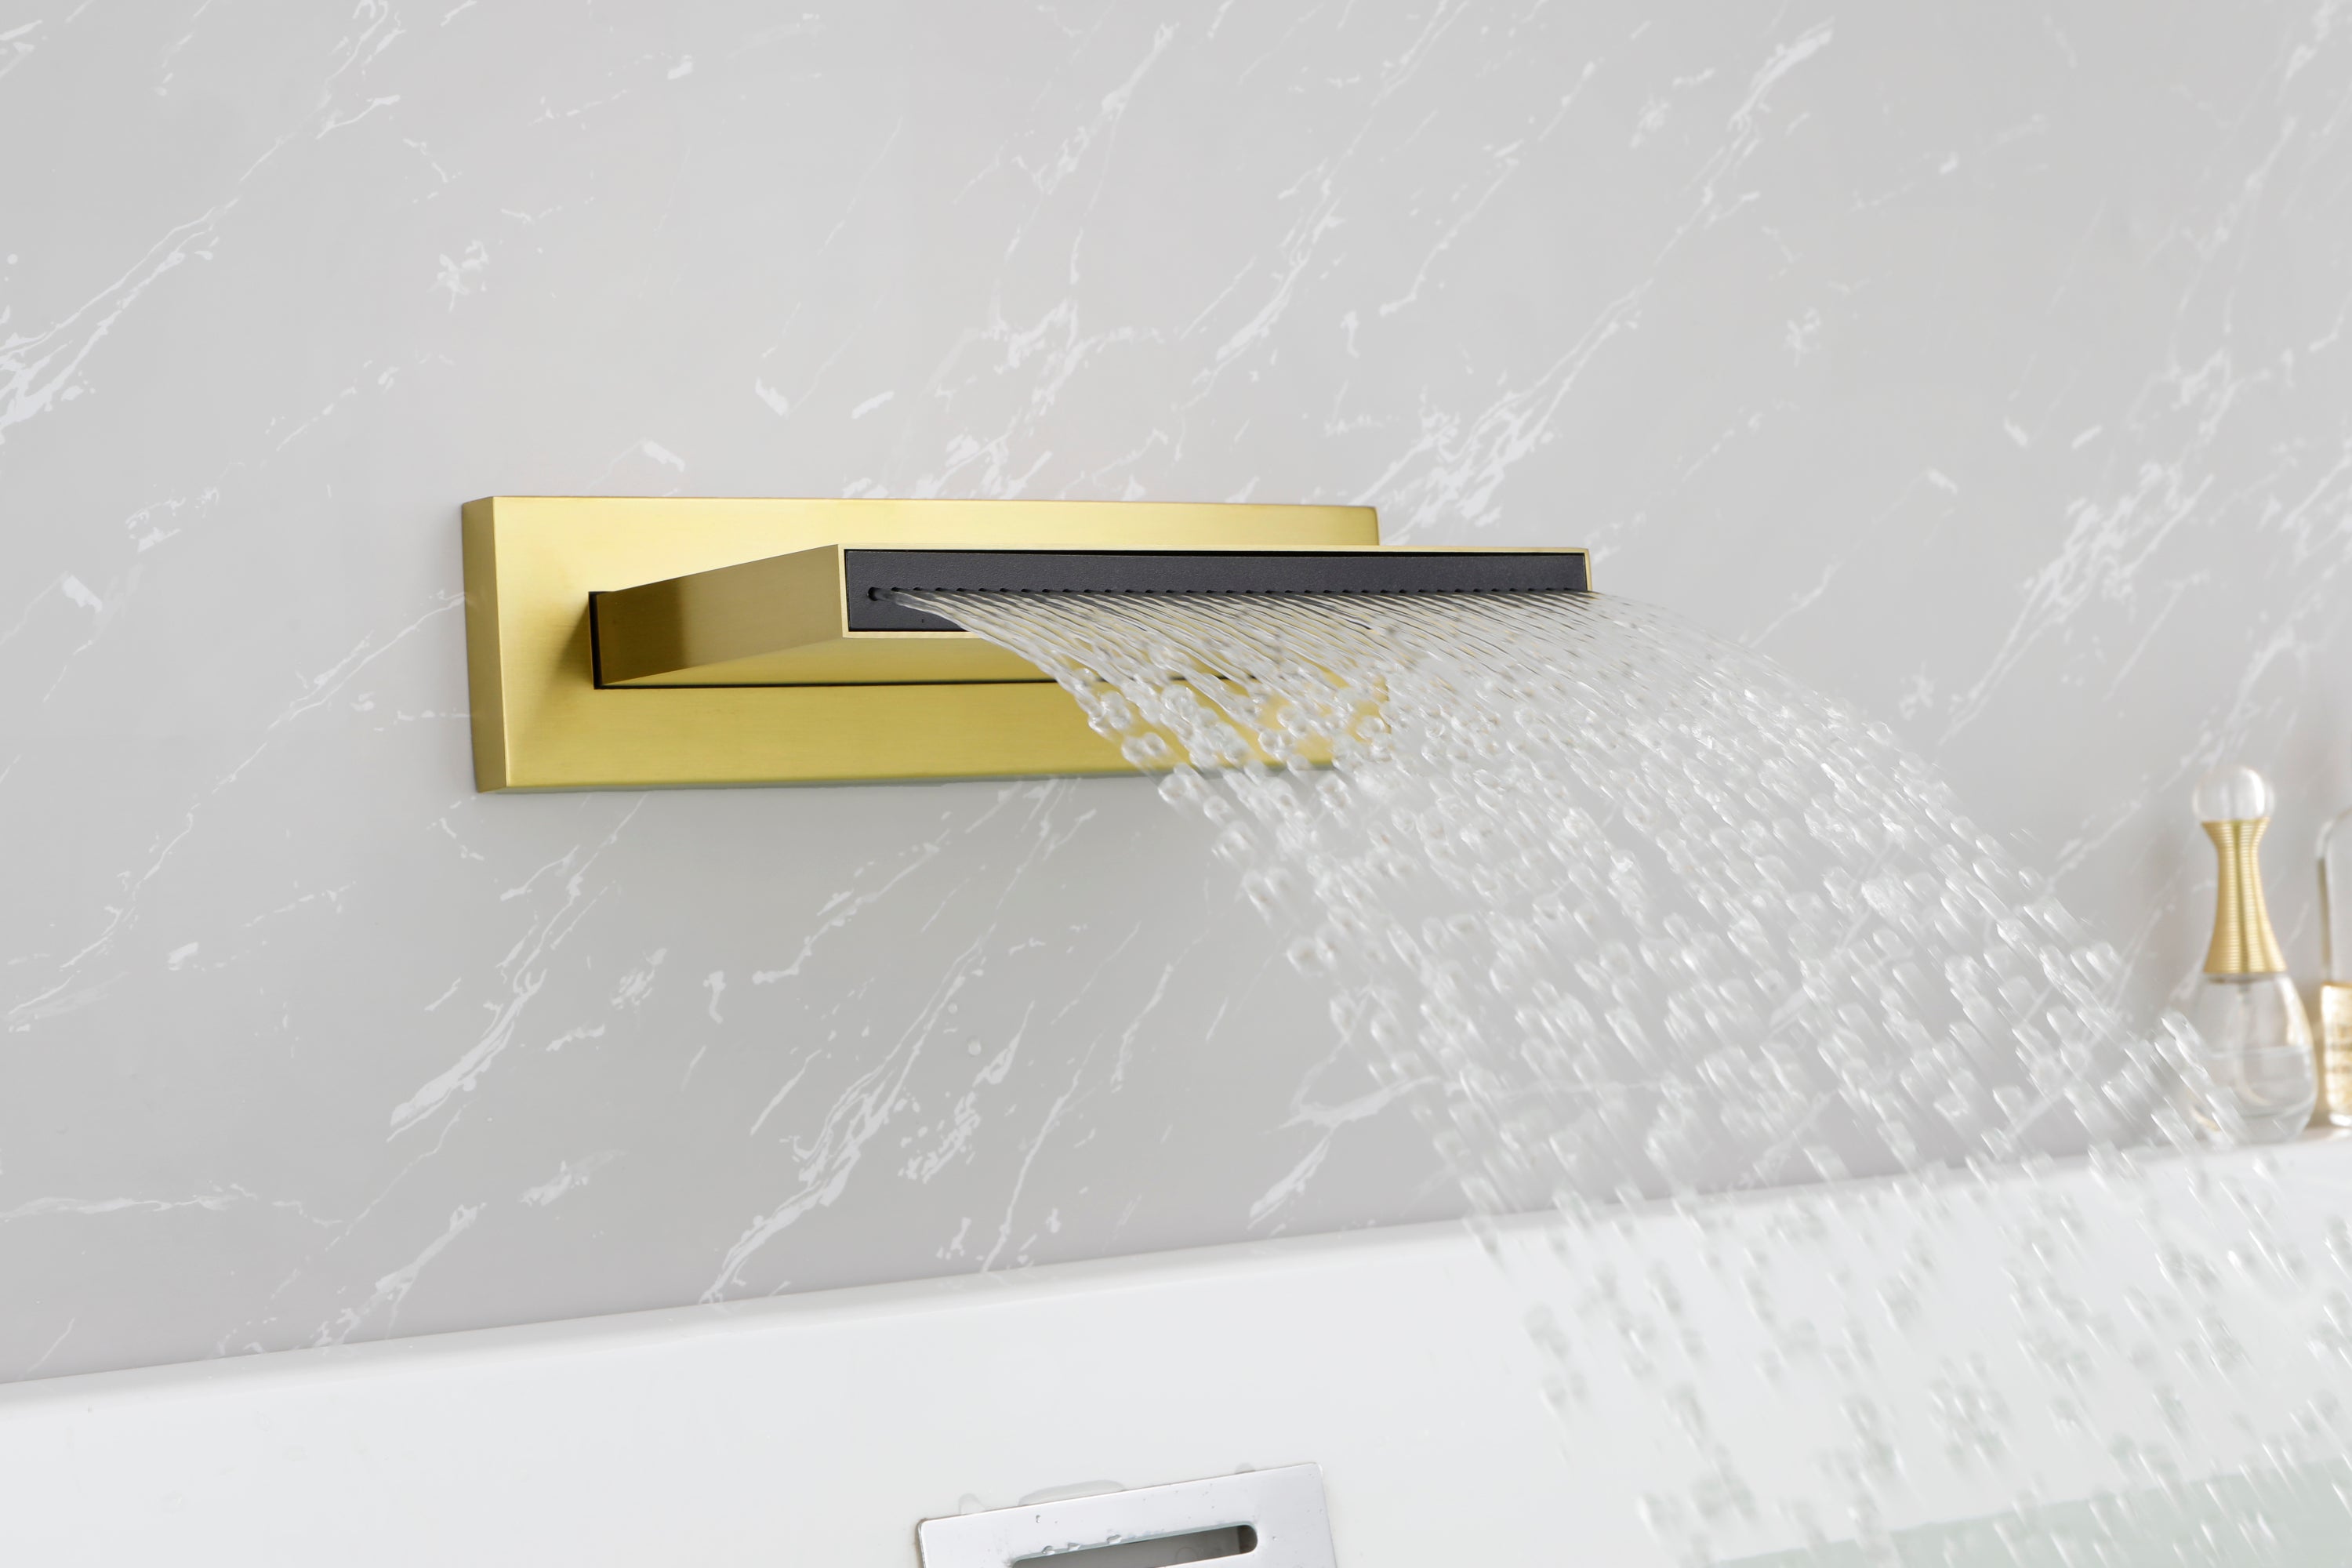 Shower Waterfall Tub Faucet Wall Mount Tub Filler Spout For Bathroom sink High Flow Cascade Waterfall - Gold